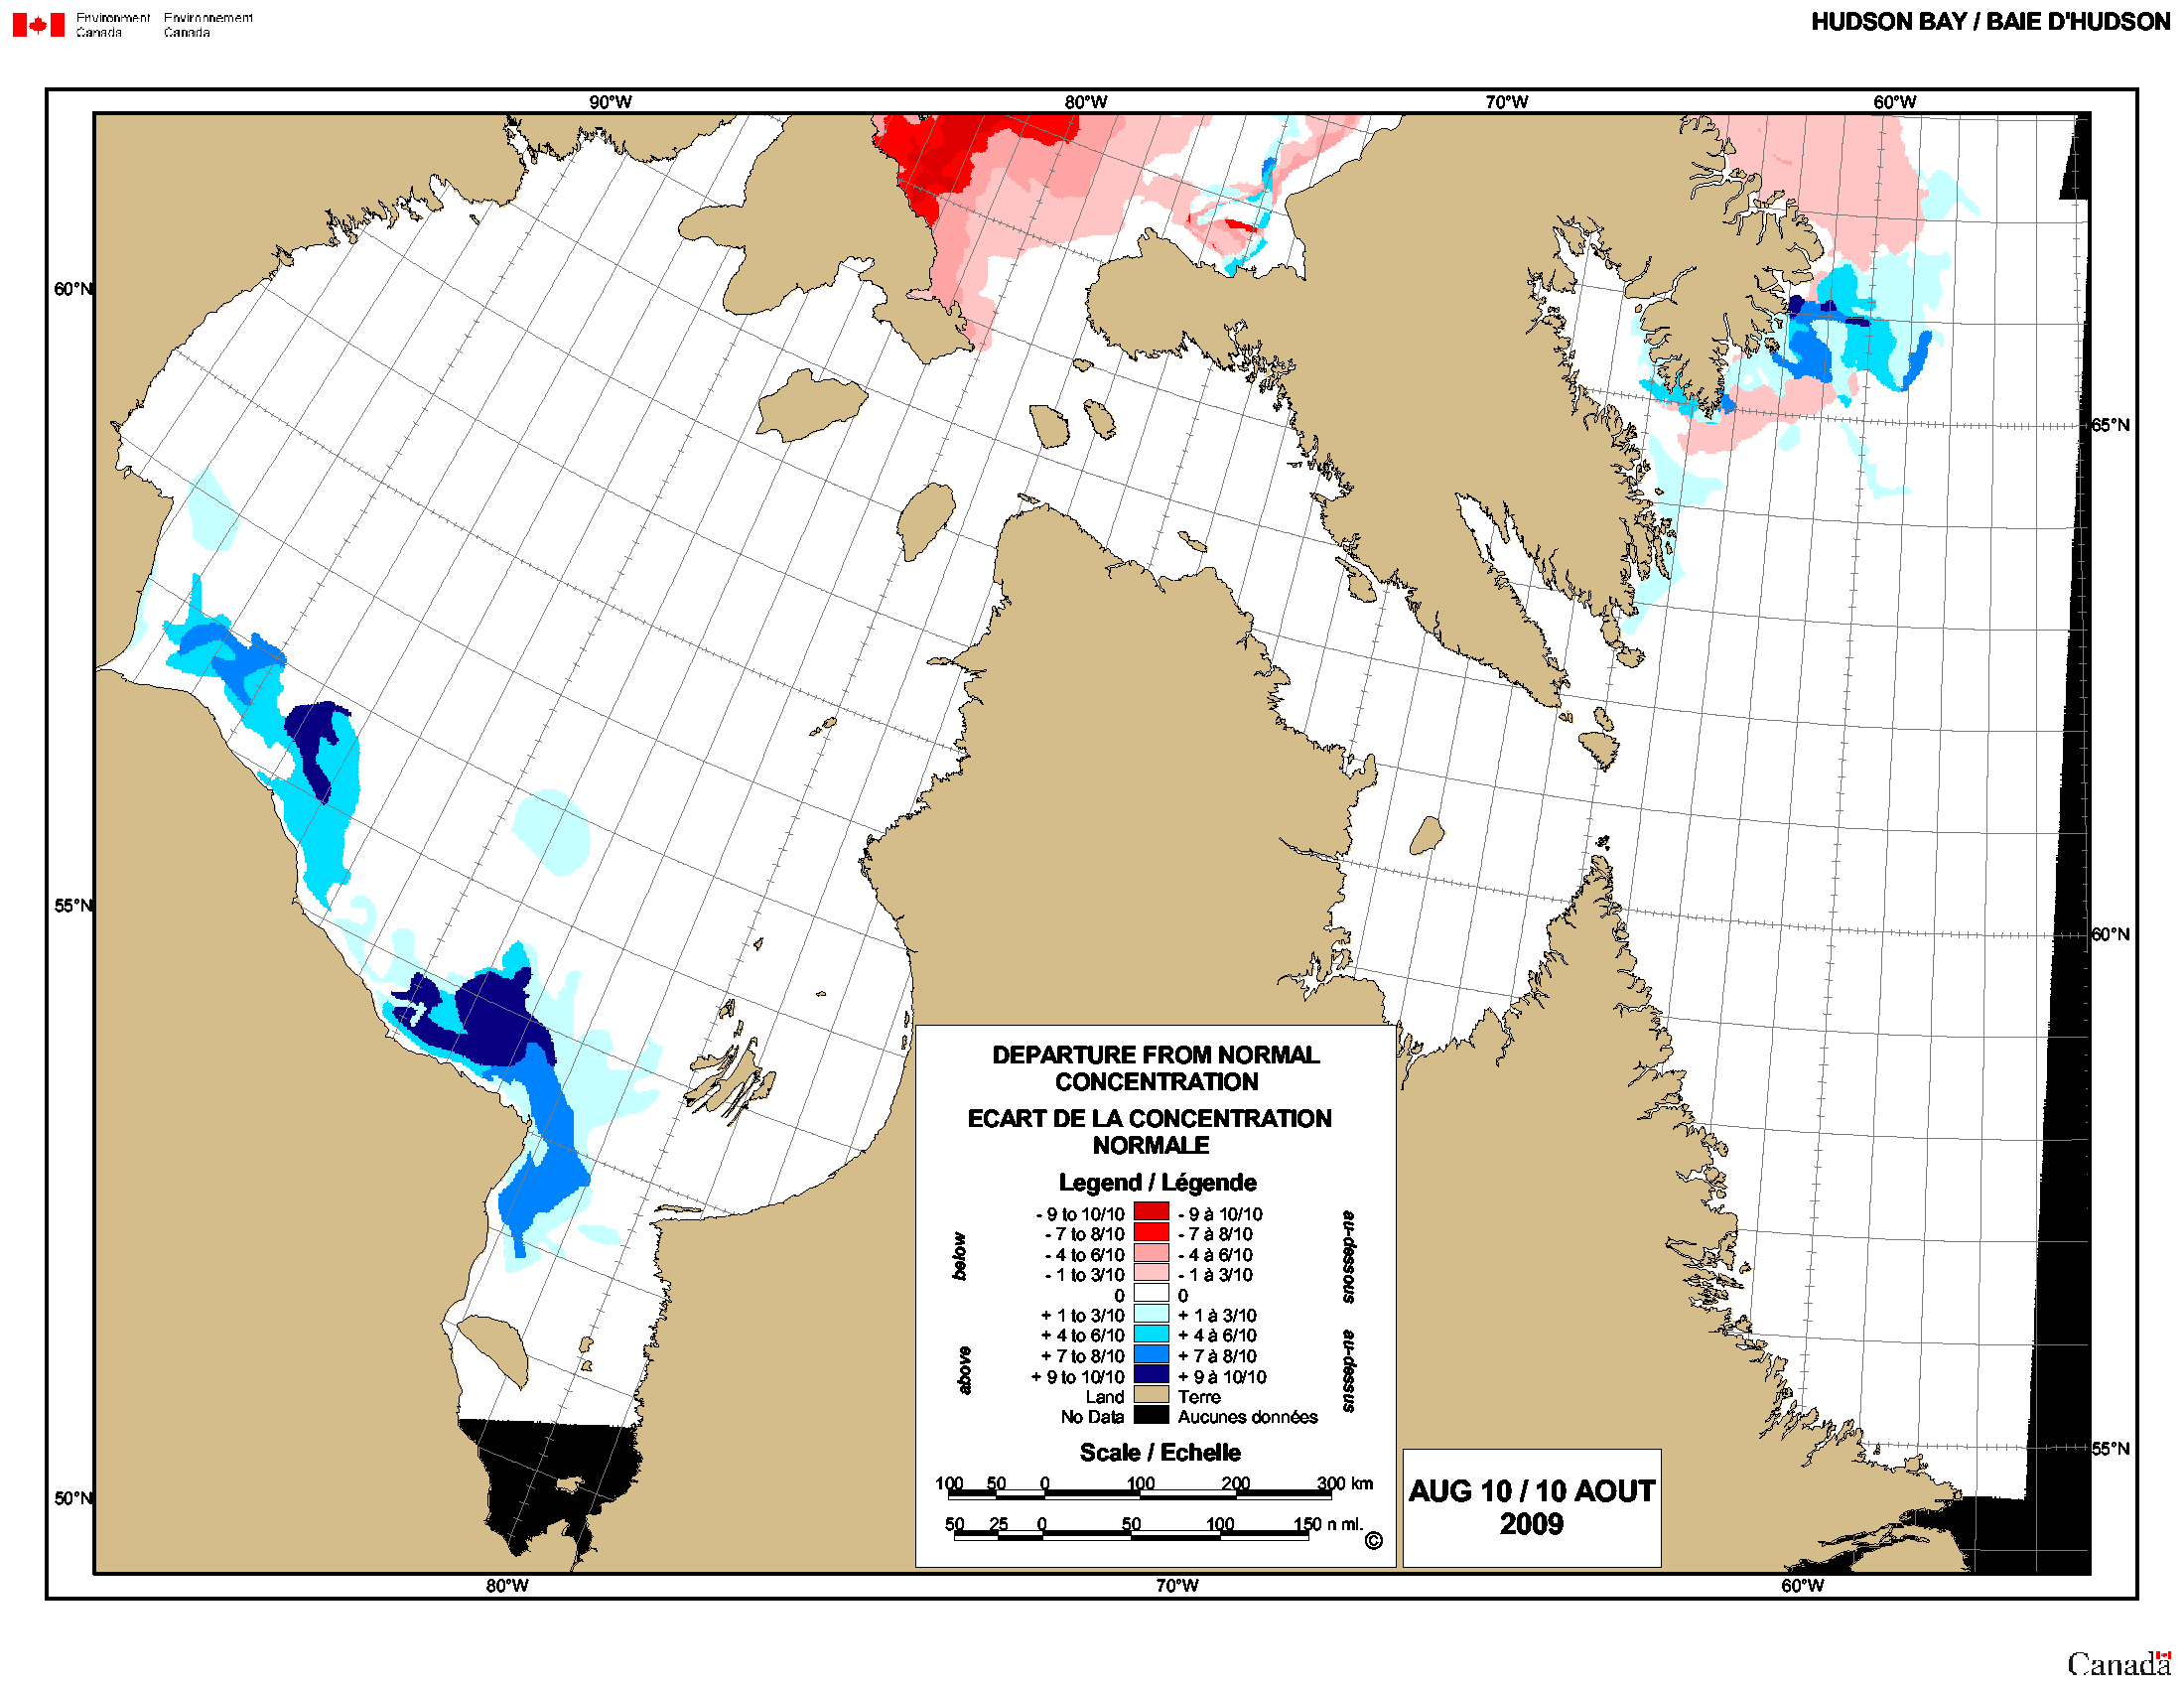 Ice Concentration departure from normal